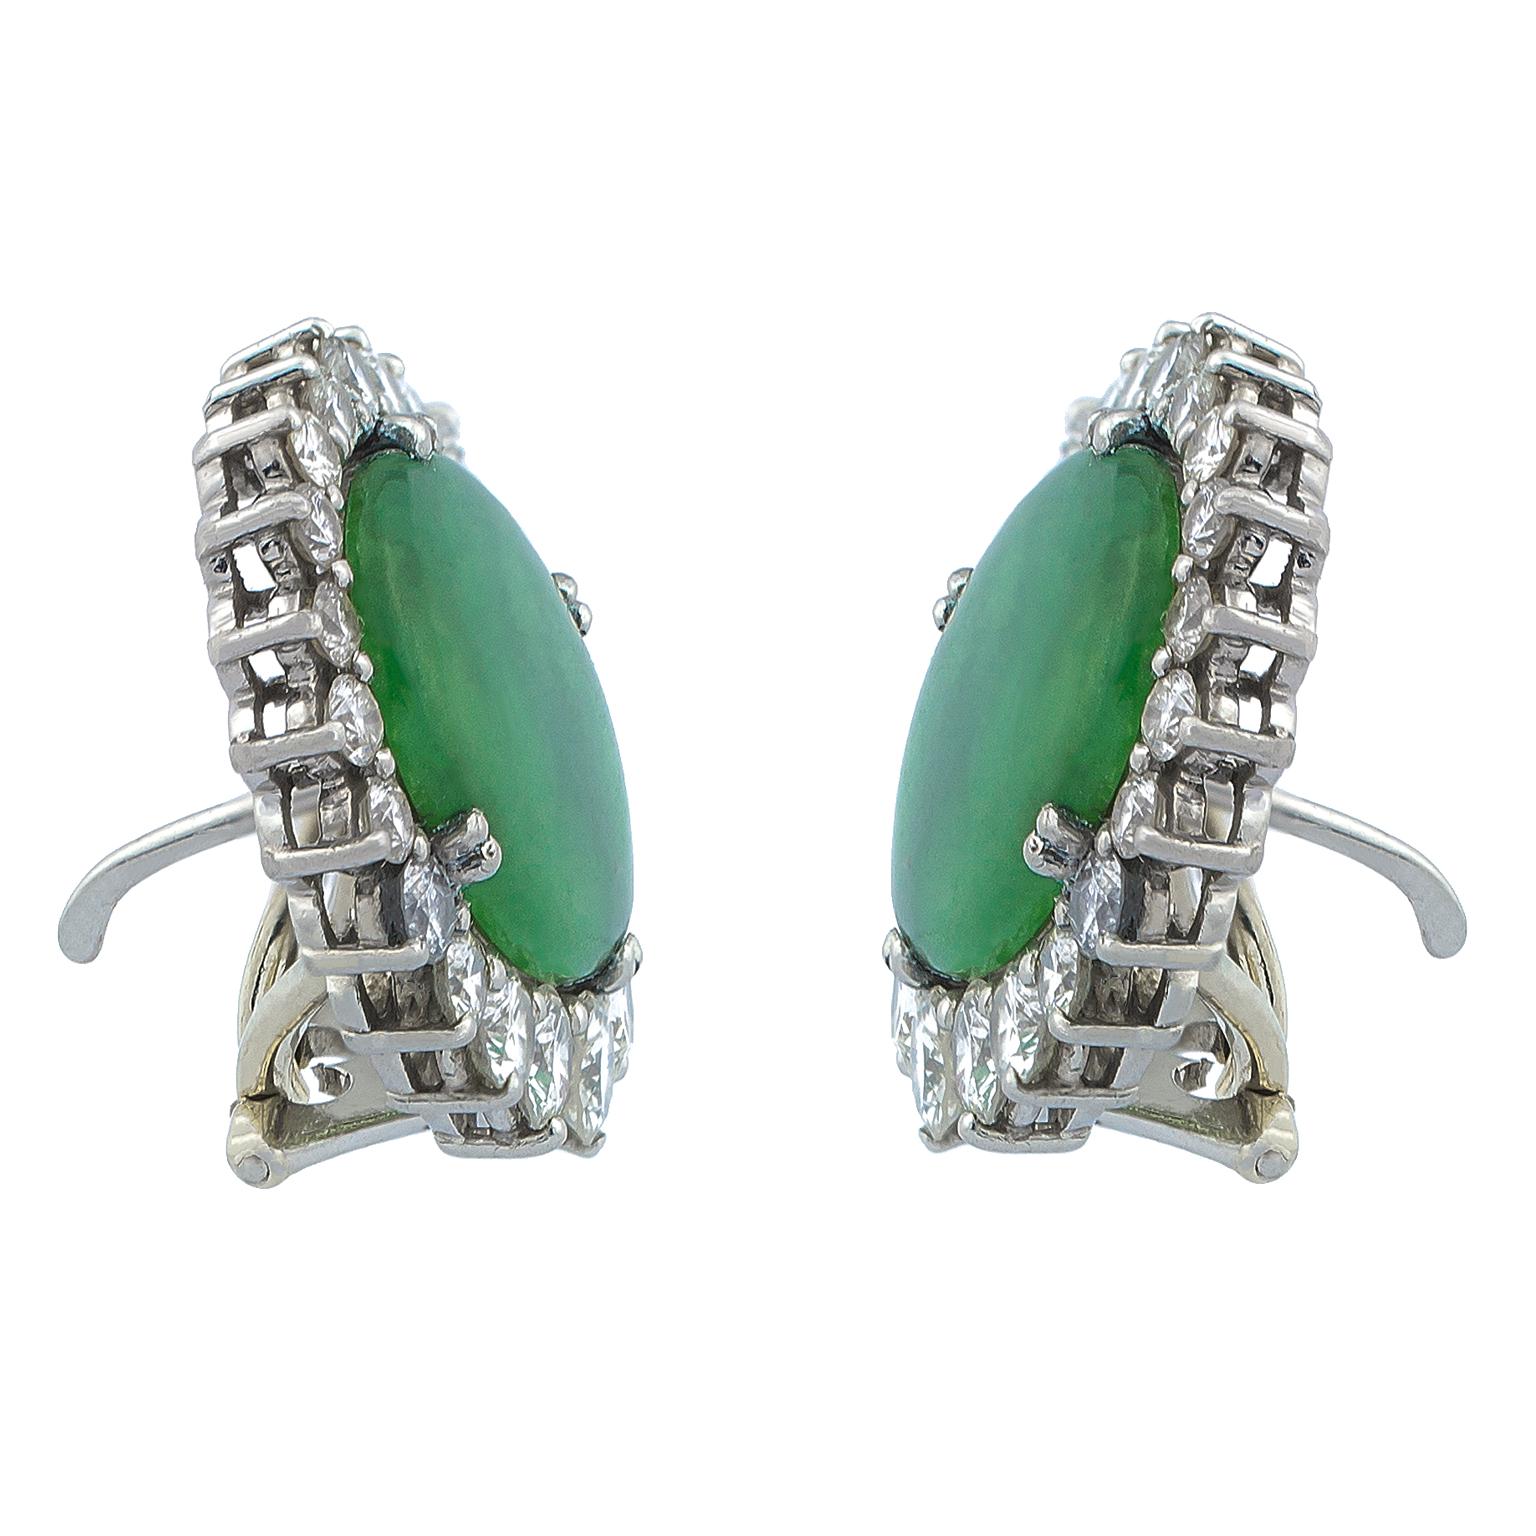 White gold earrings centered by oval jades surrounded by 38 round brilliant diamonds in increasing size set on three-prong mounts, totalling 2.74 carats in weight.